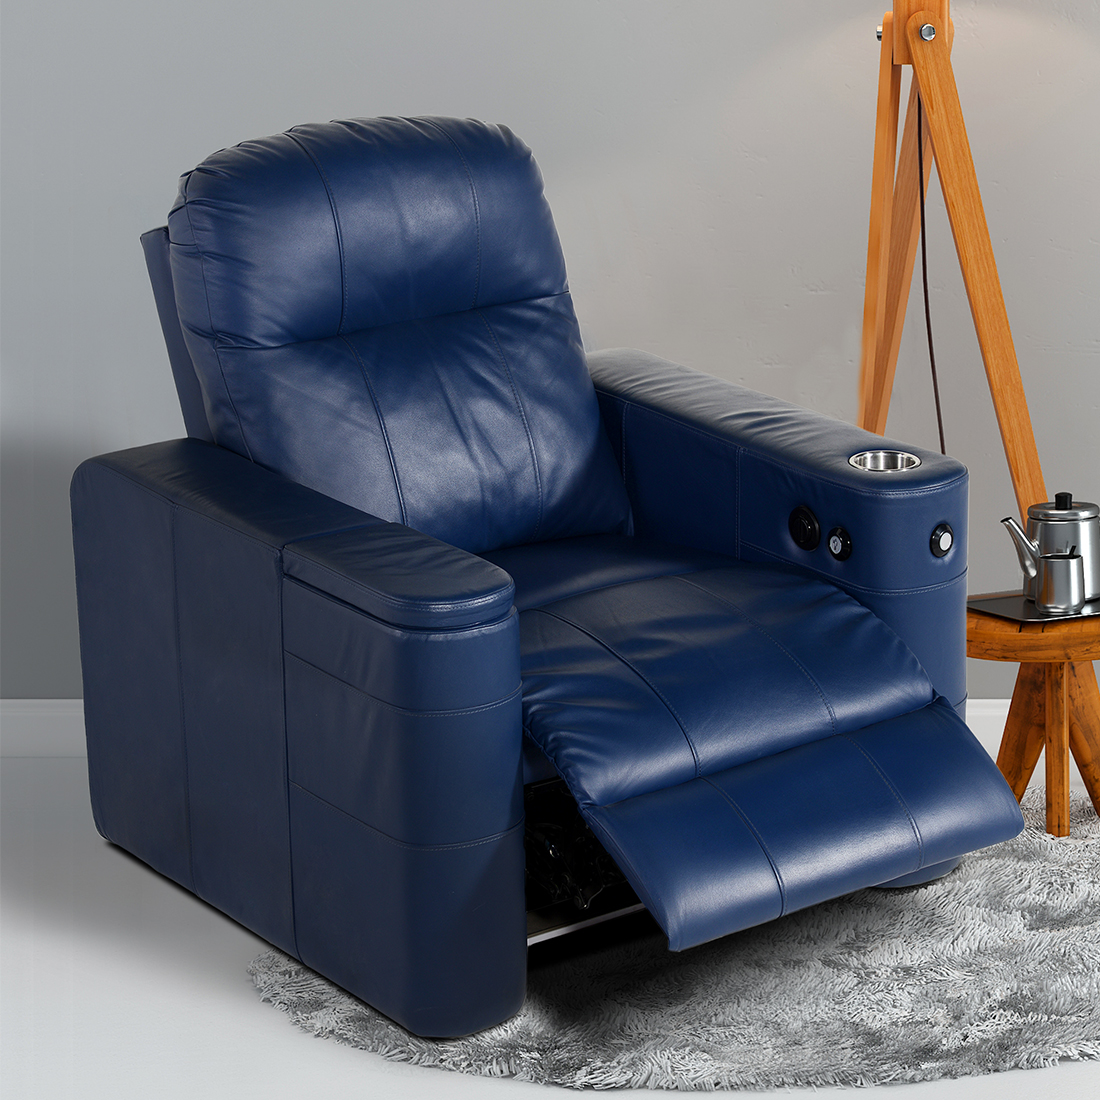 Home Theater Recliner Style-099